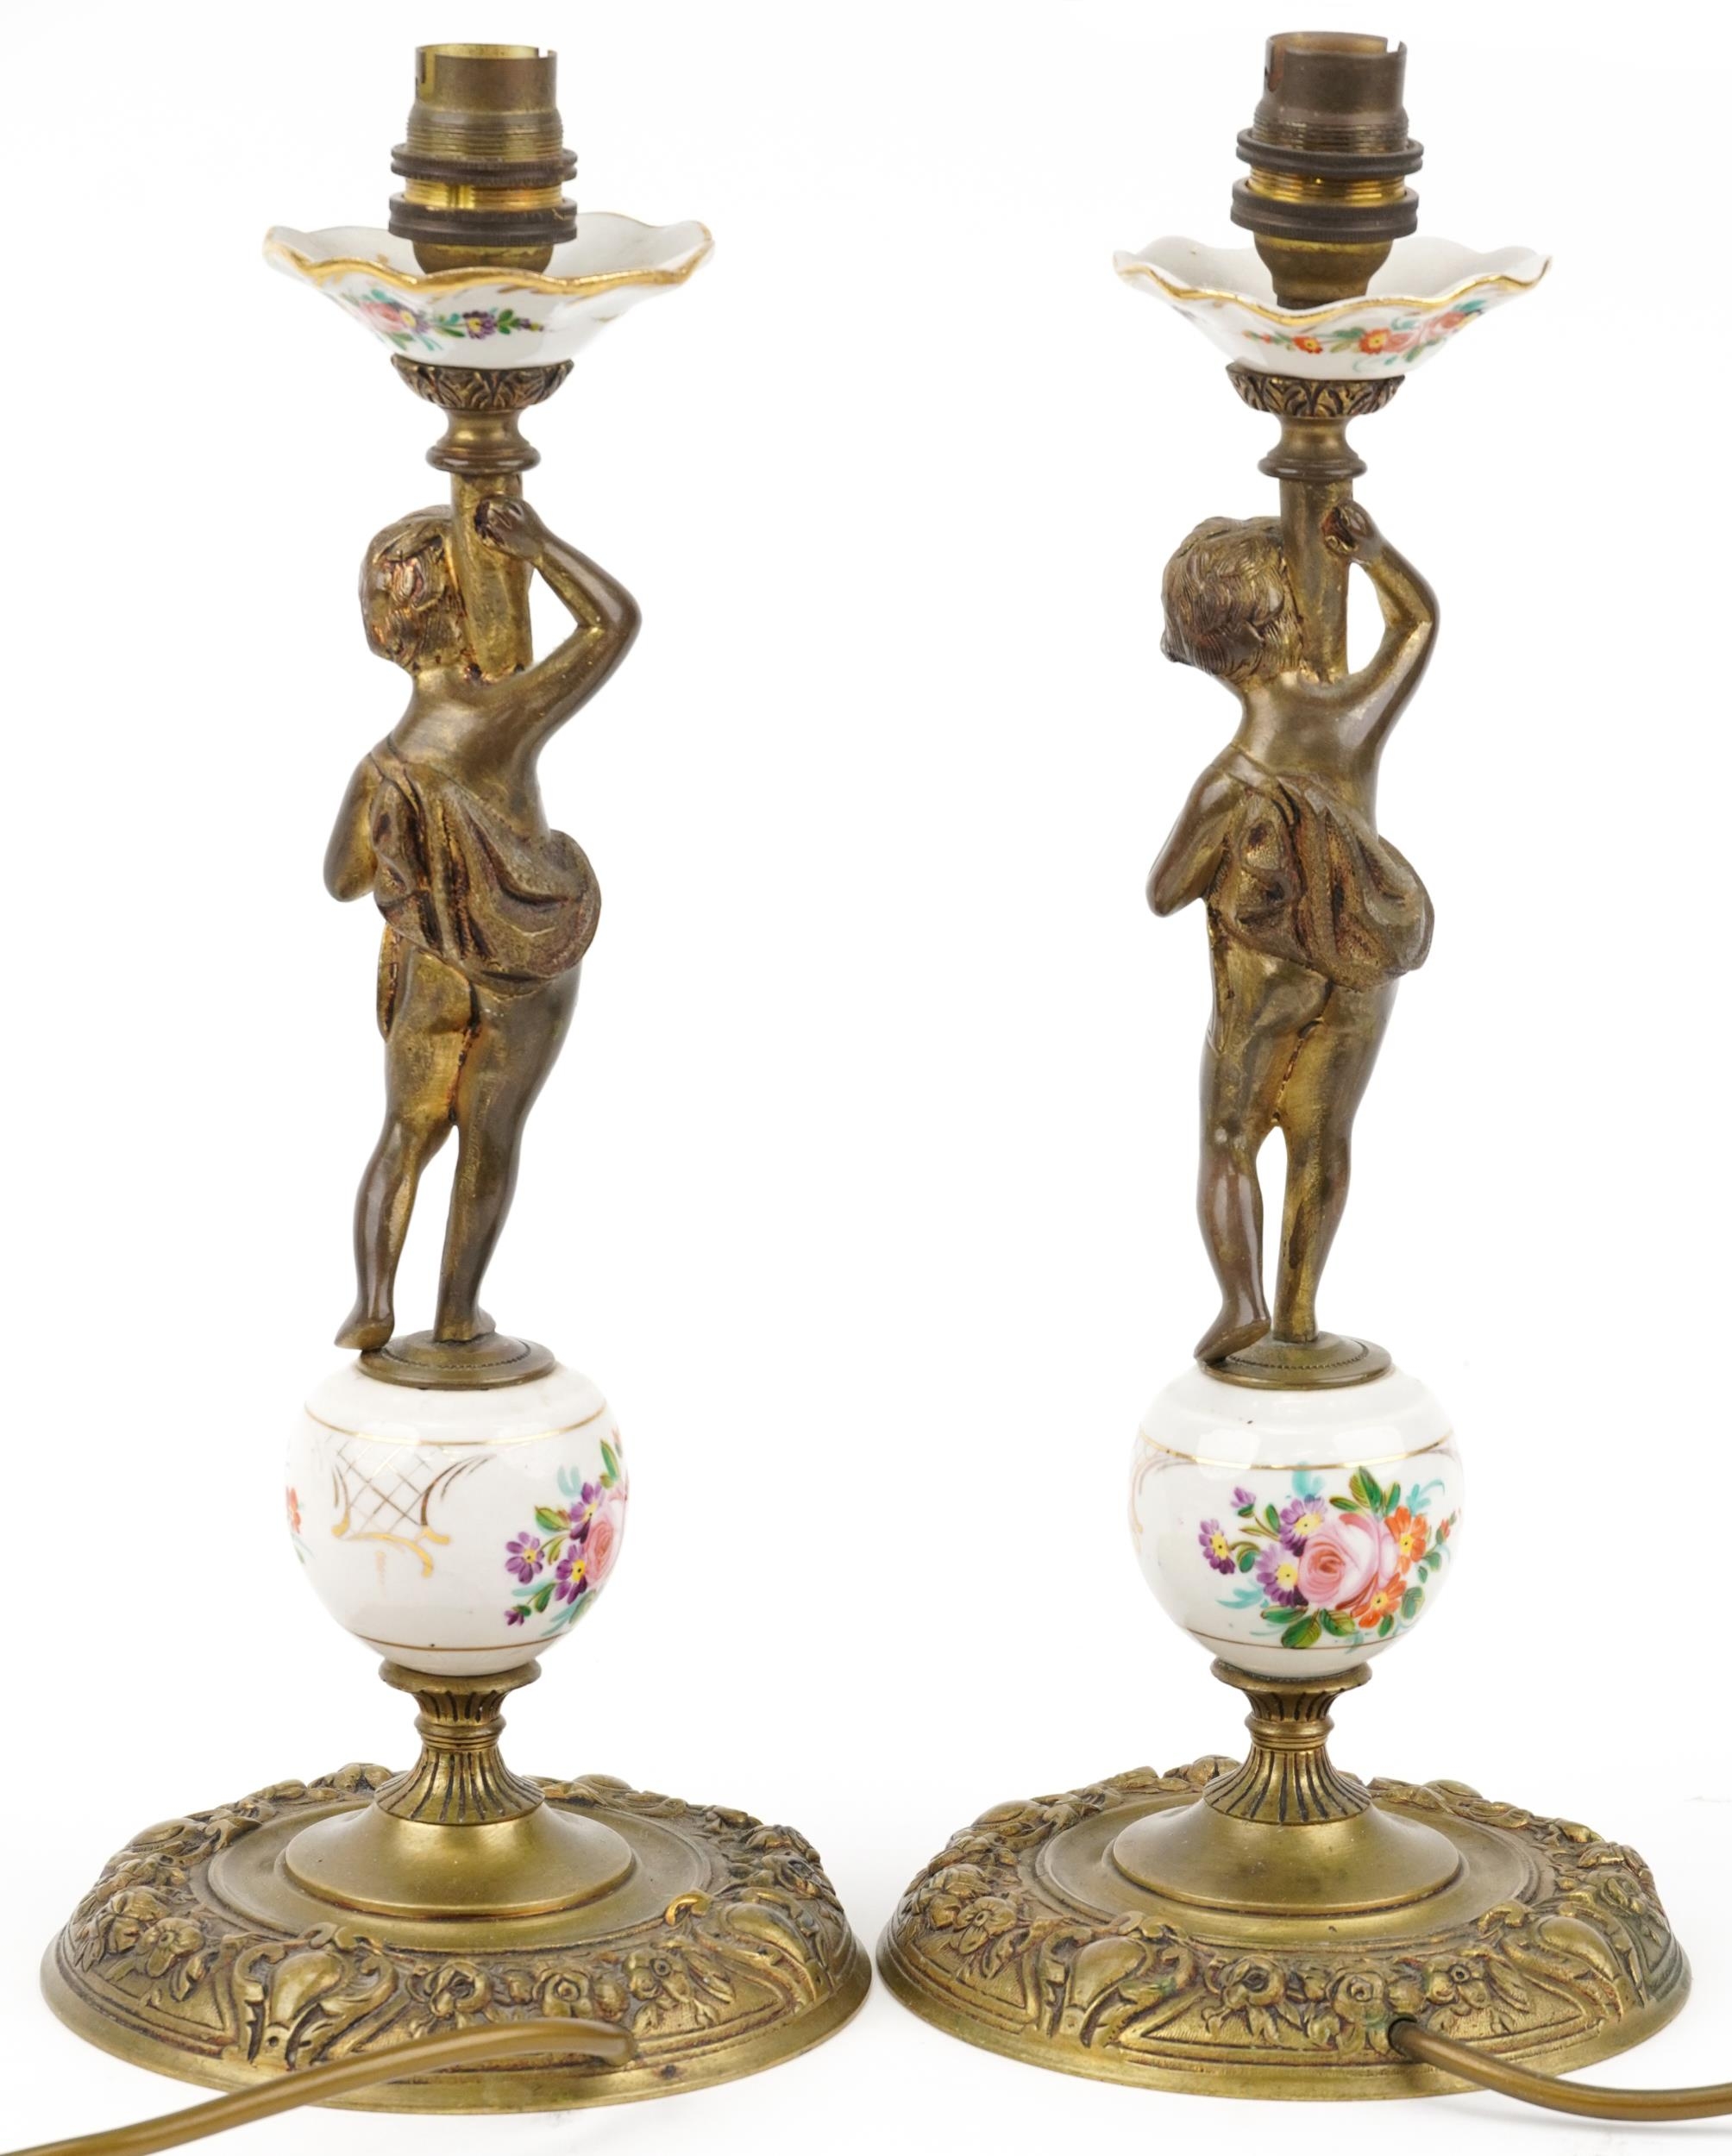 Pair of gilt brass and porcelain Putti design candlesticks hand painted with flowers, each 35cm high - Image 2 of 3